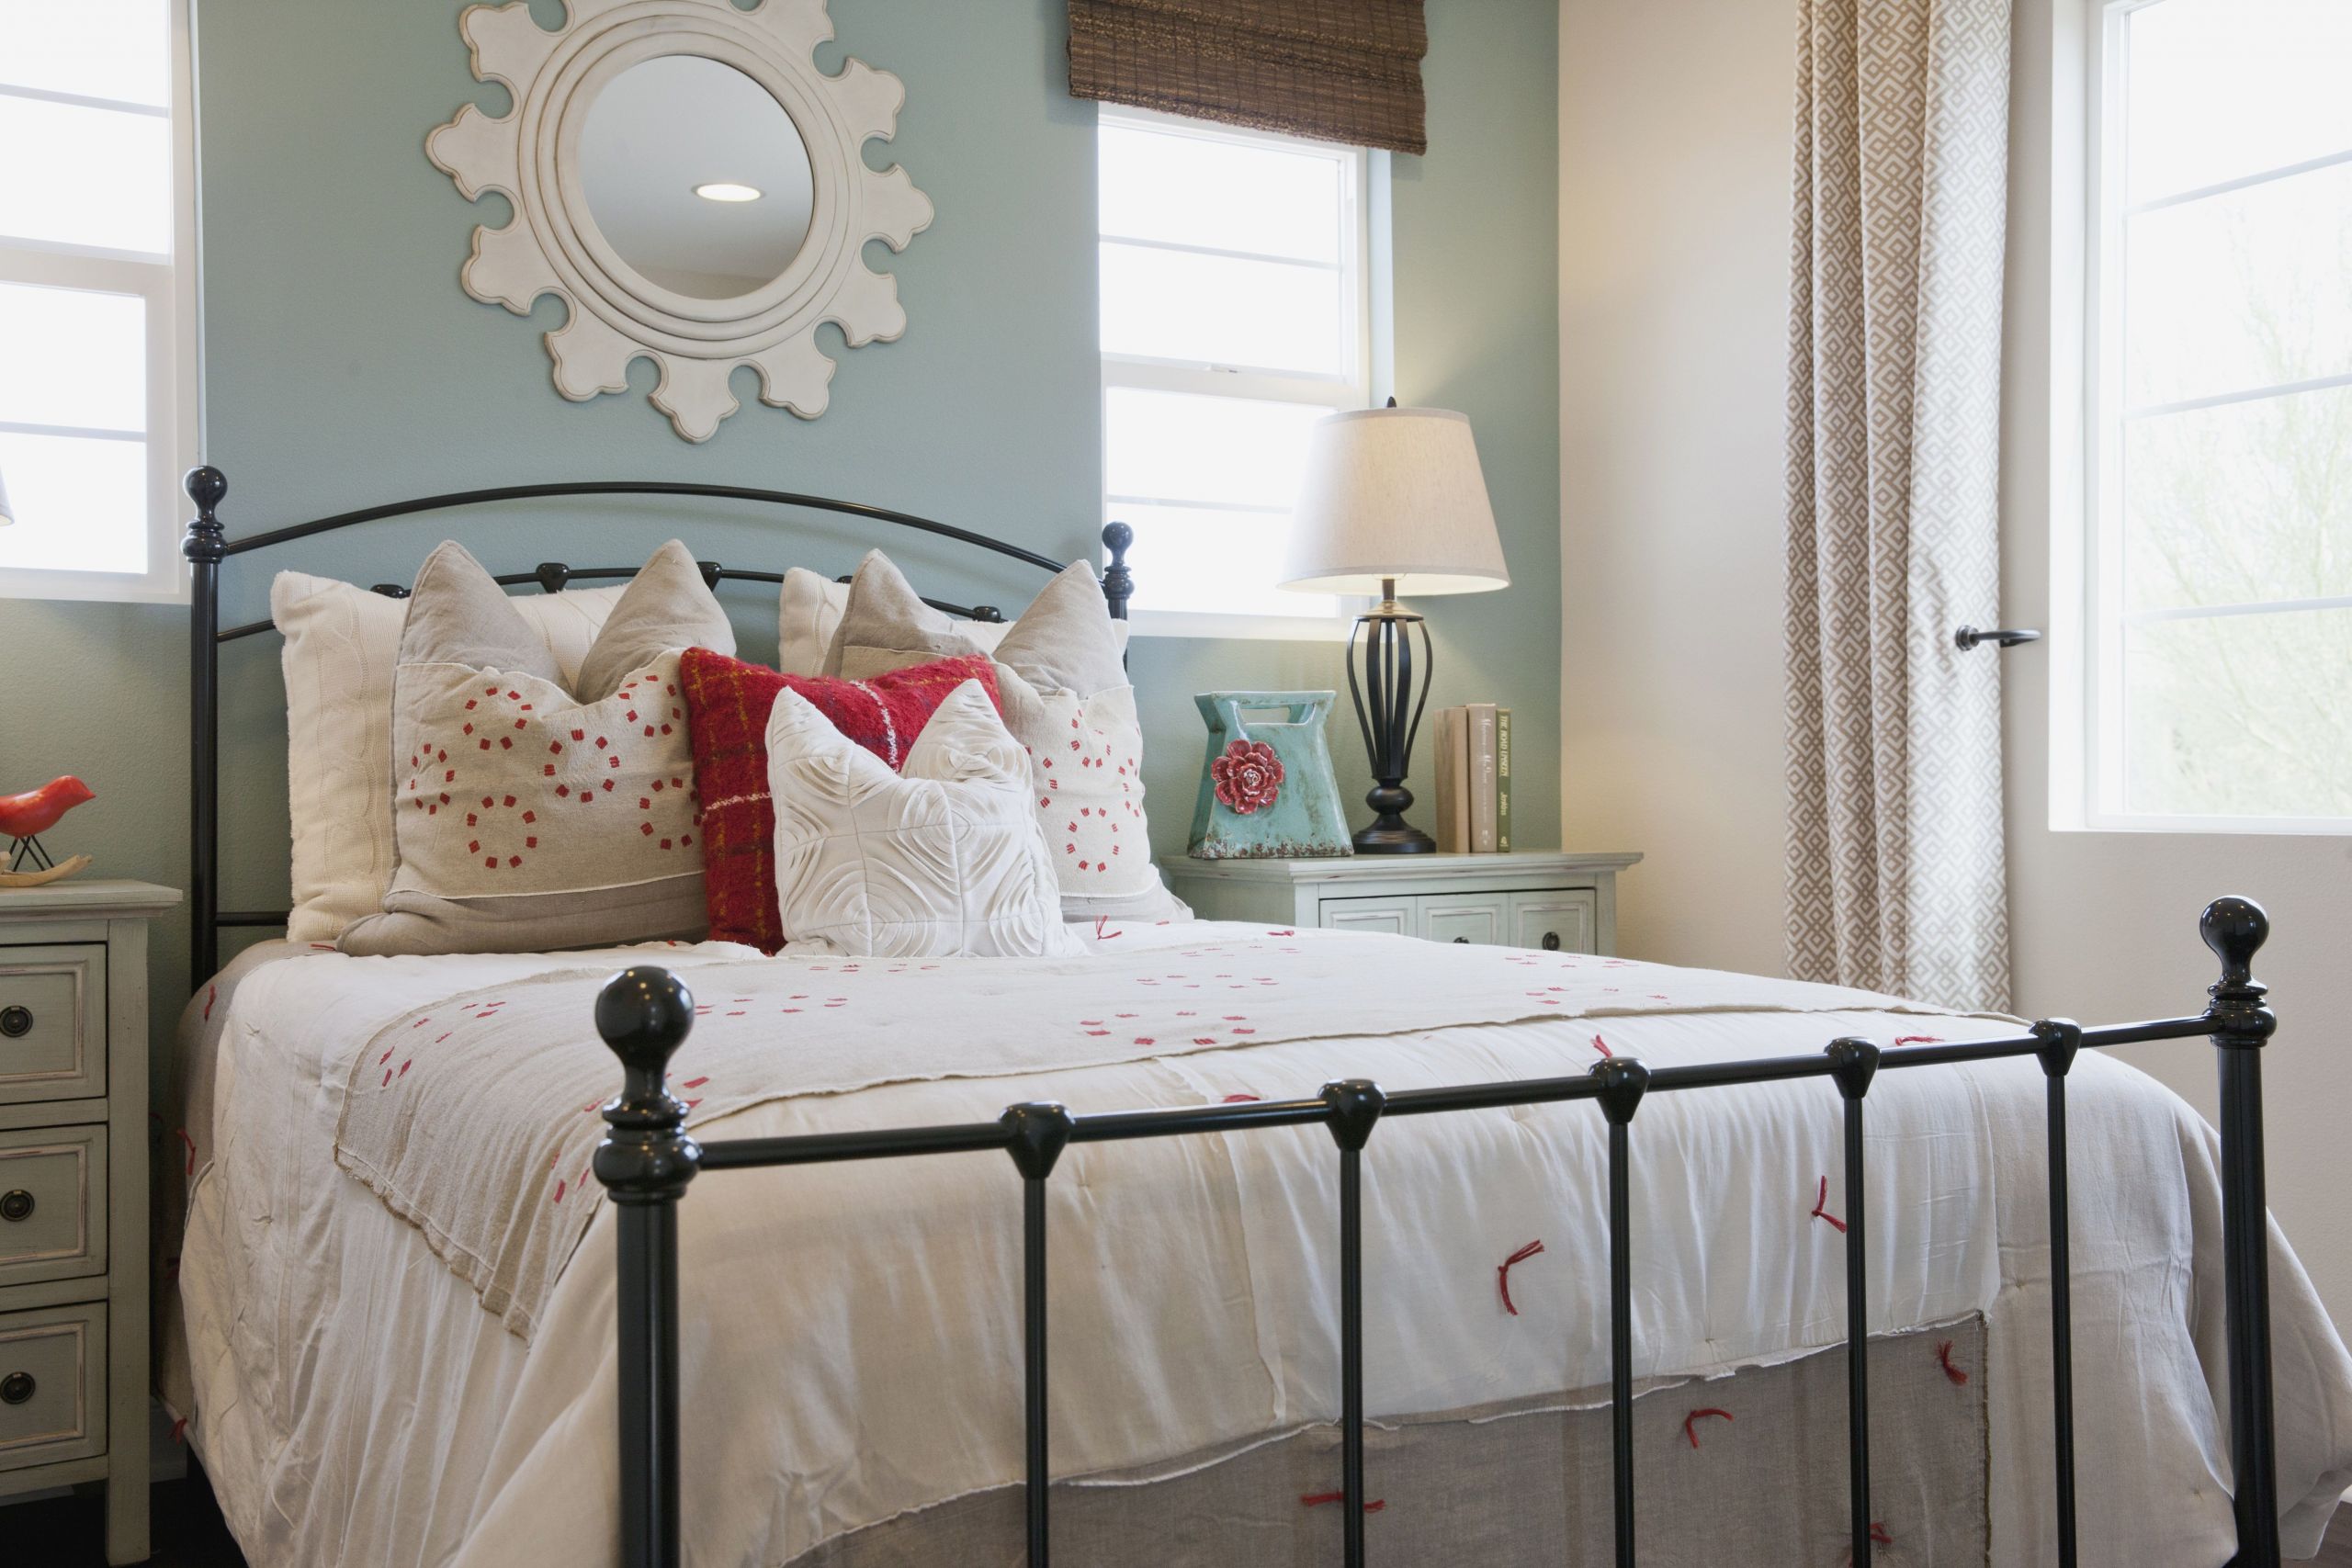 Images Of Shabby Chic Bedrooms Lovely S and Tips for Decorating A Shabby Chic Bedroom